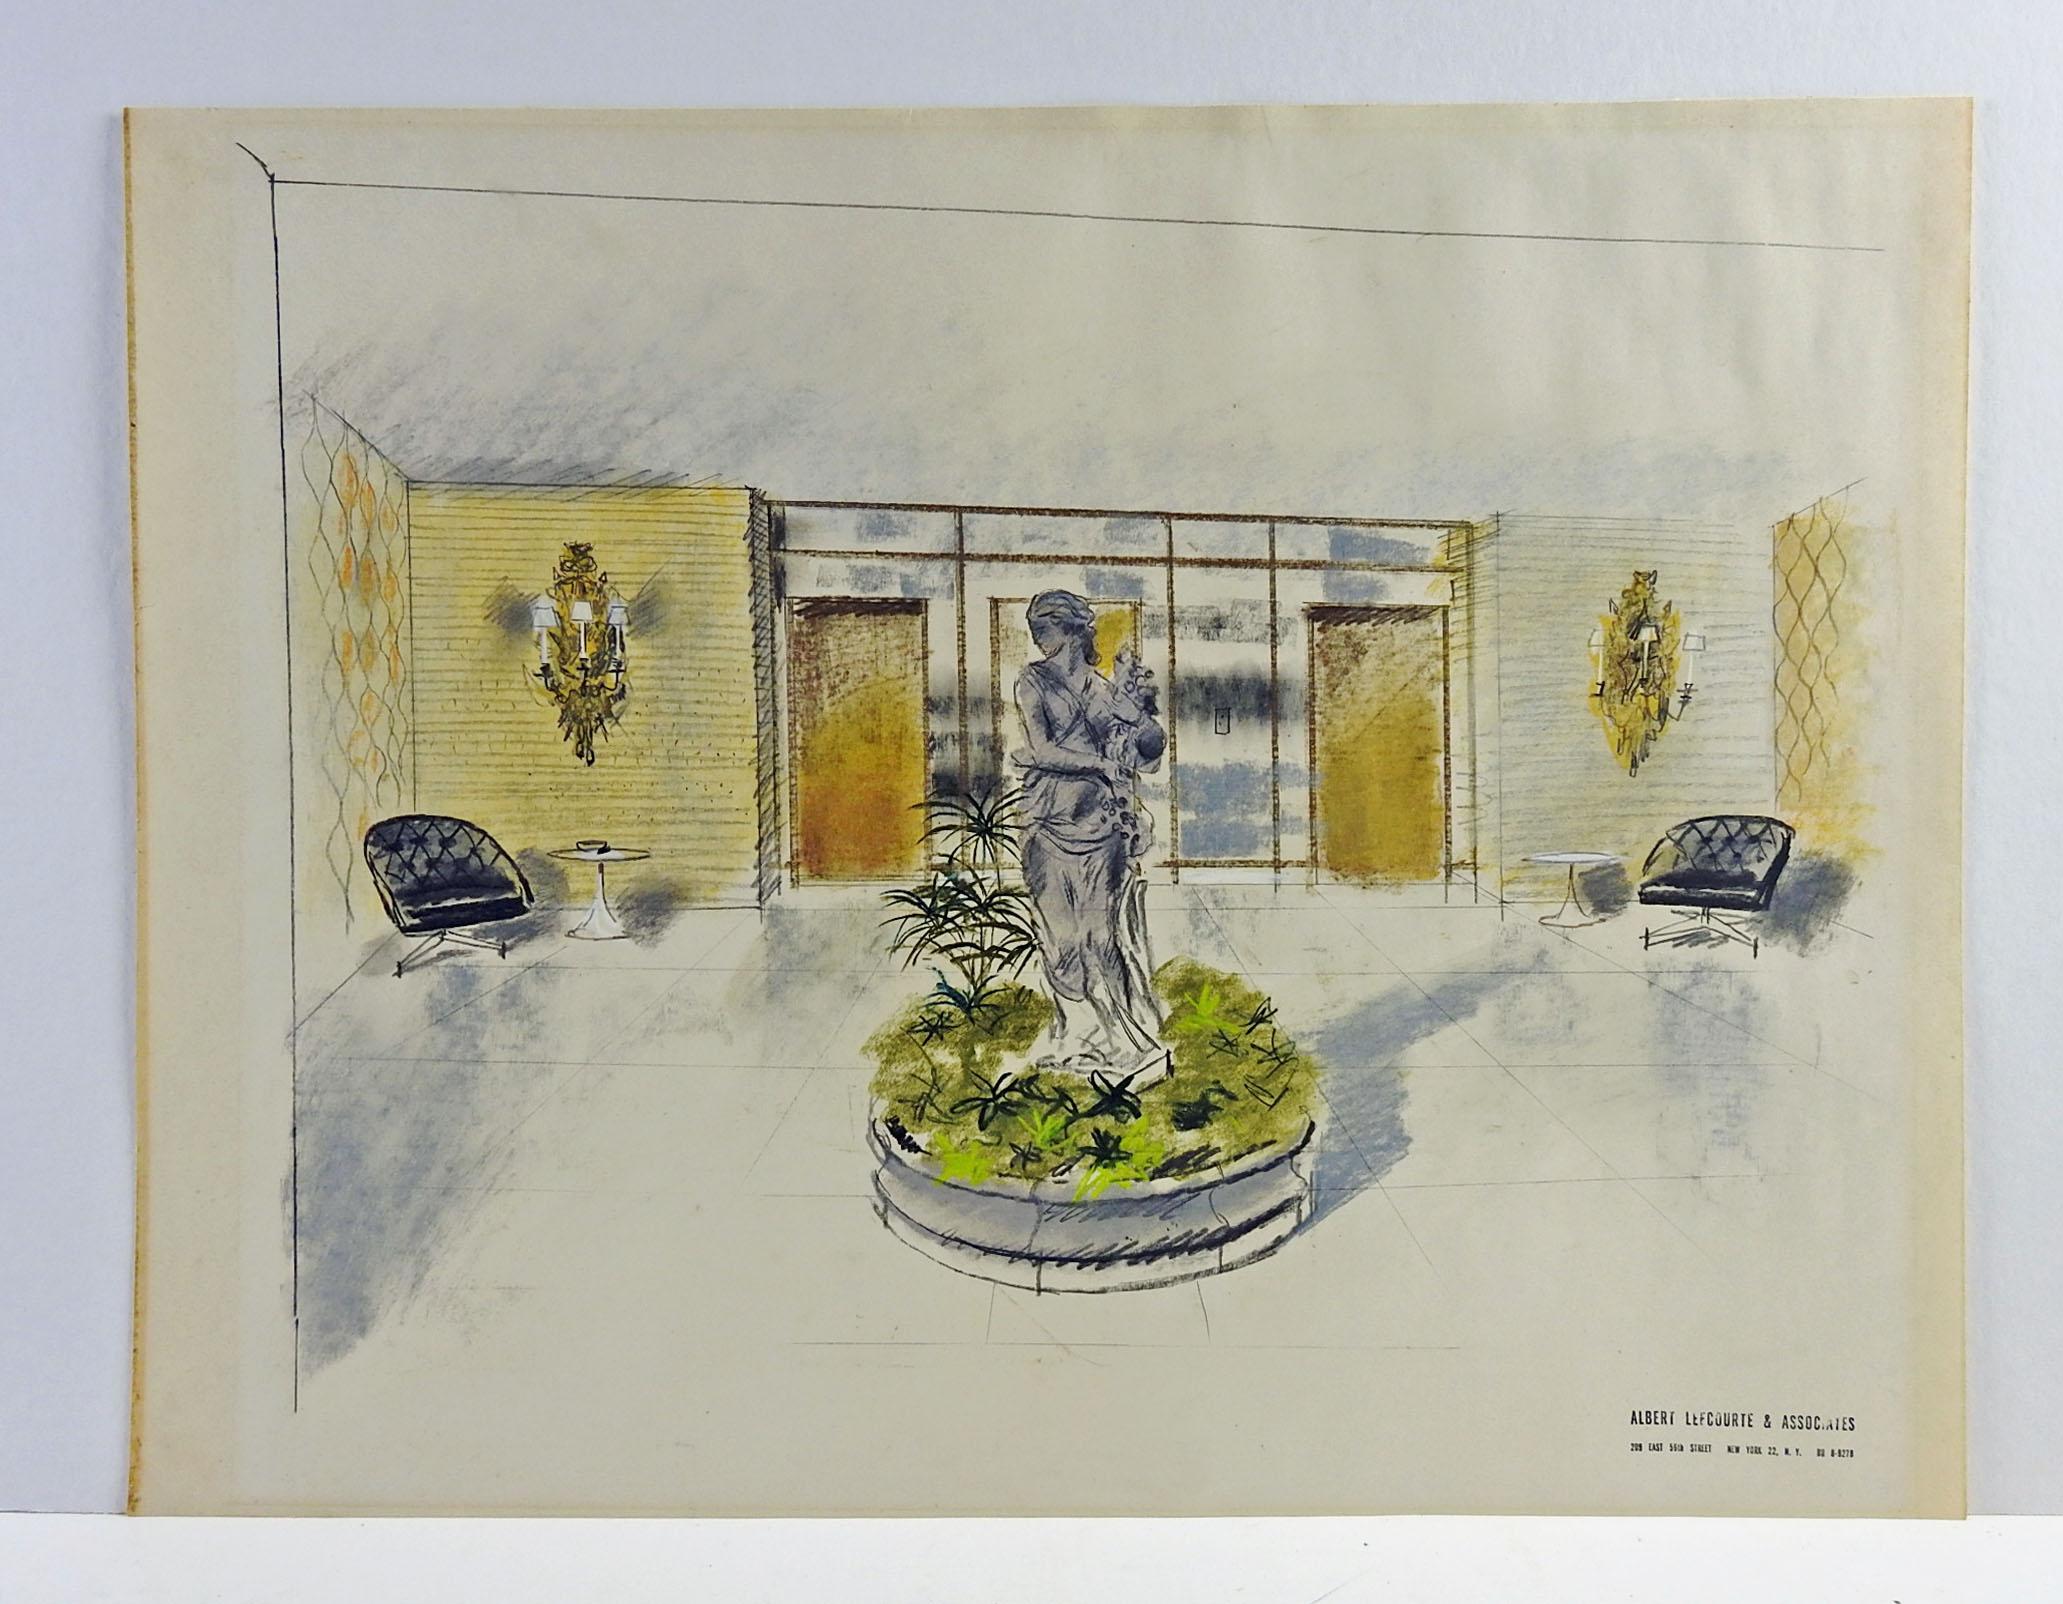 Architectural rendering of a courtyard circa 1950 rendered in oil pastel with gold metallic highlights on paper. Stamped Albert Leecourte & Assoc., New York, lower right corner. Unframed. Age toning.